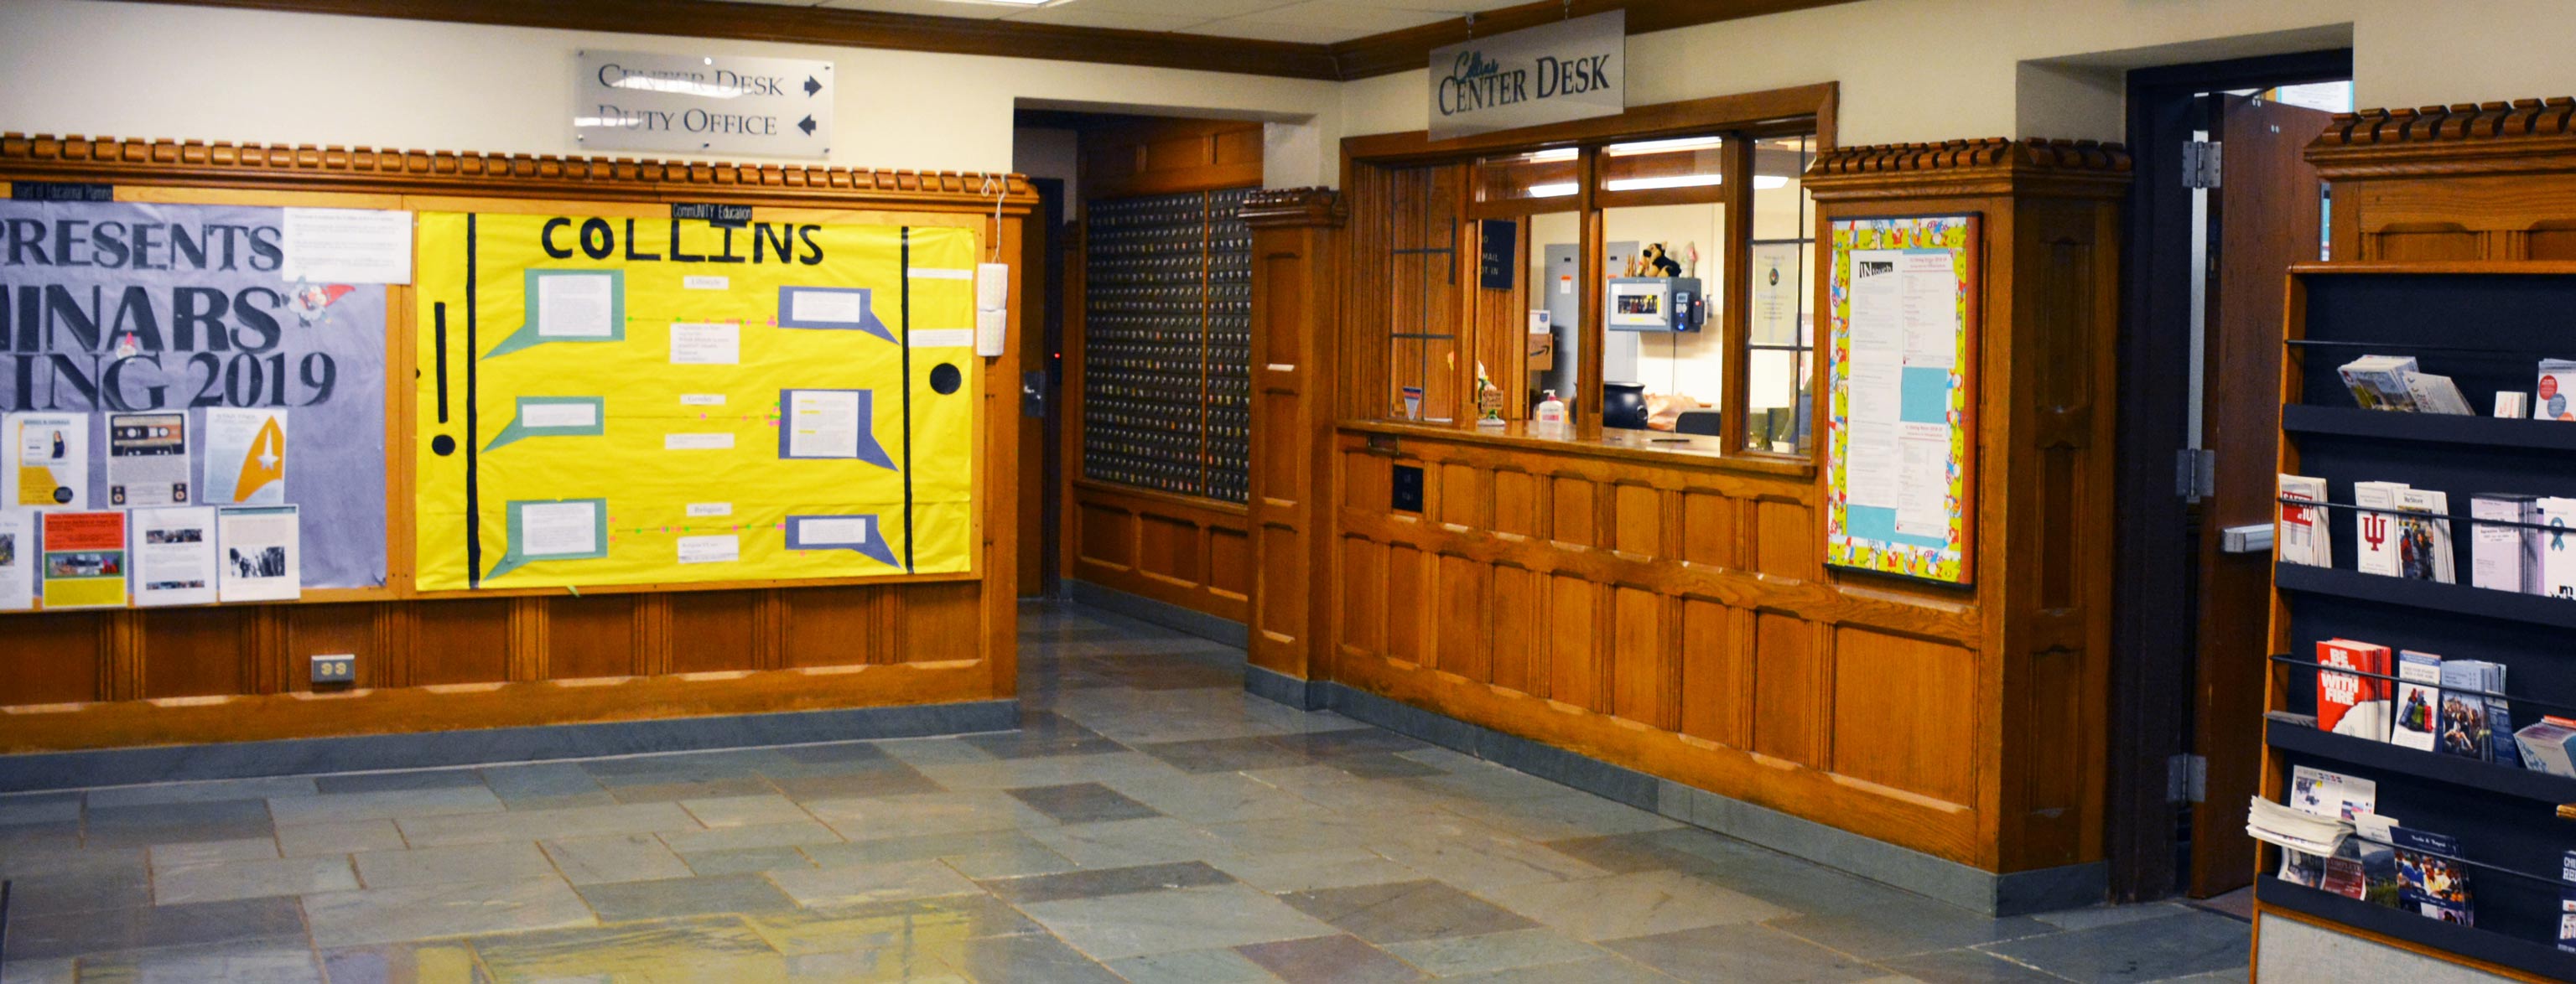 The lobby and center desk area of the Collins Living-Learning Center